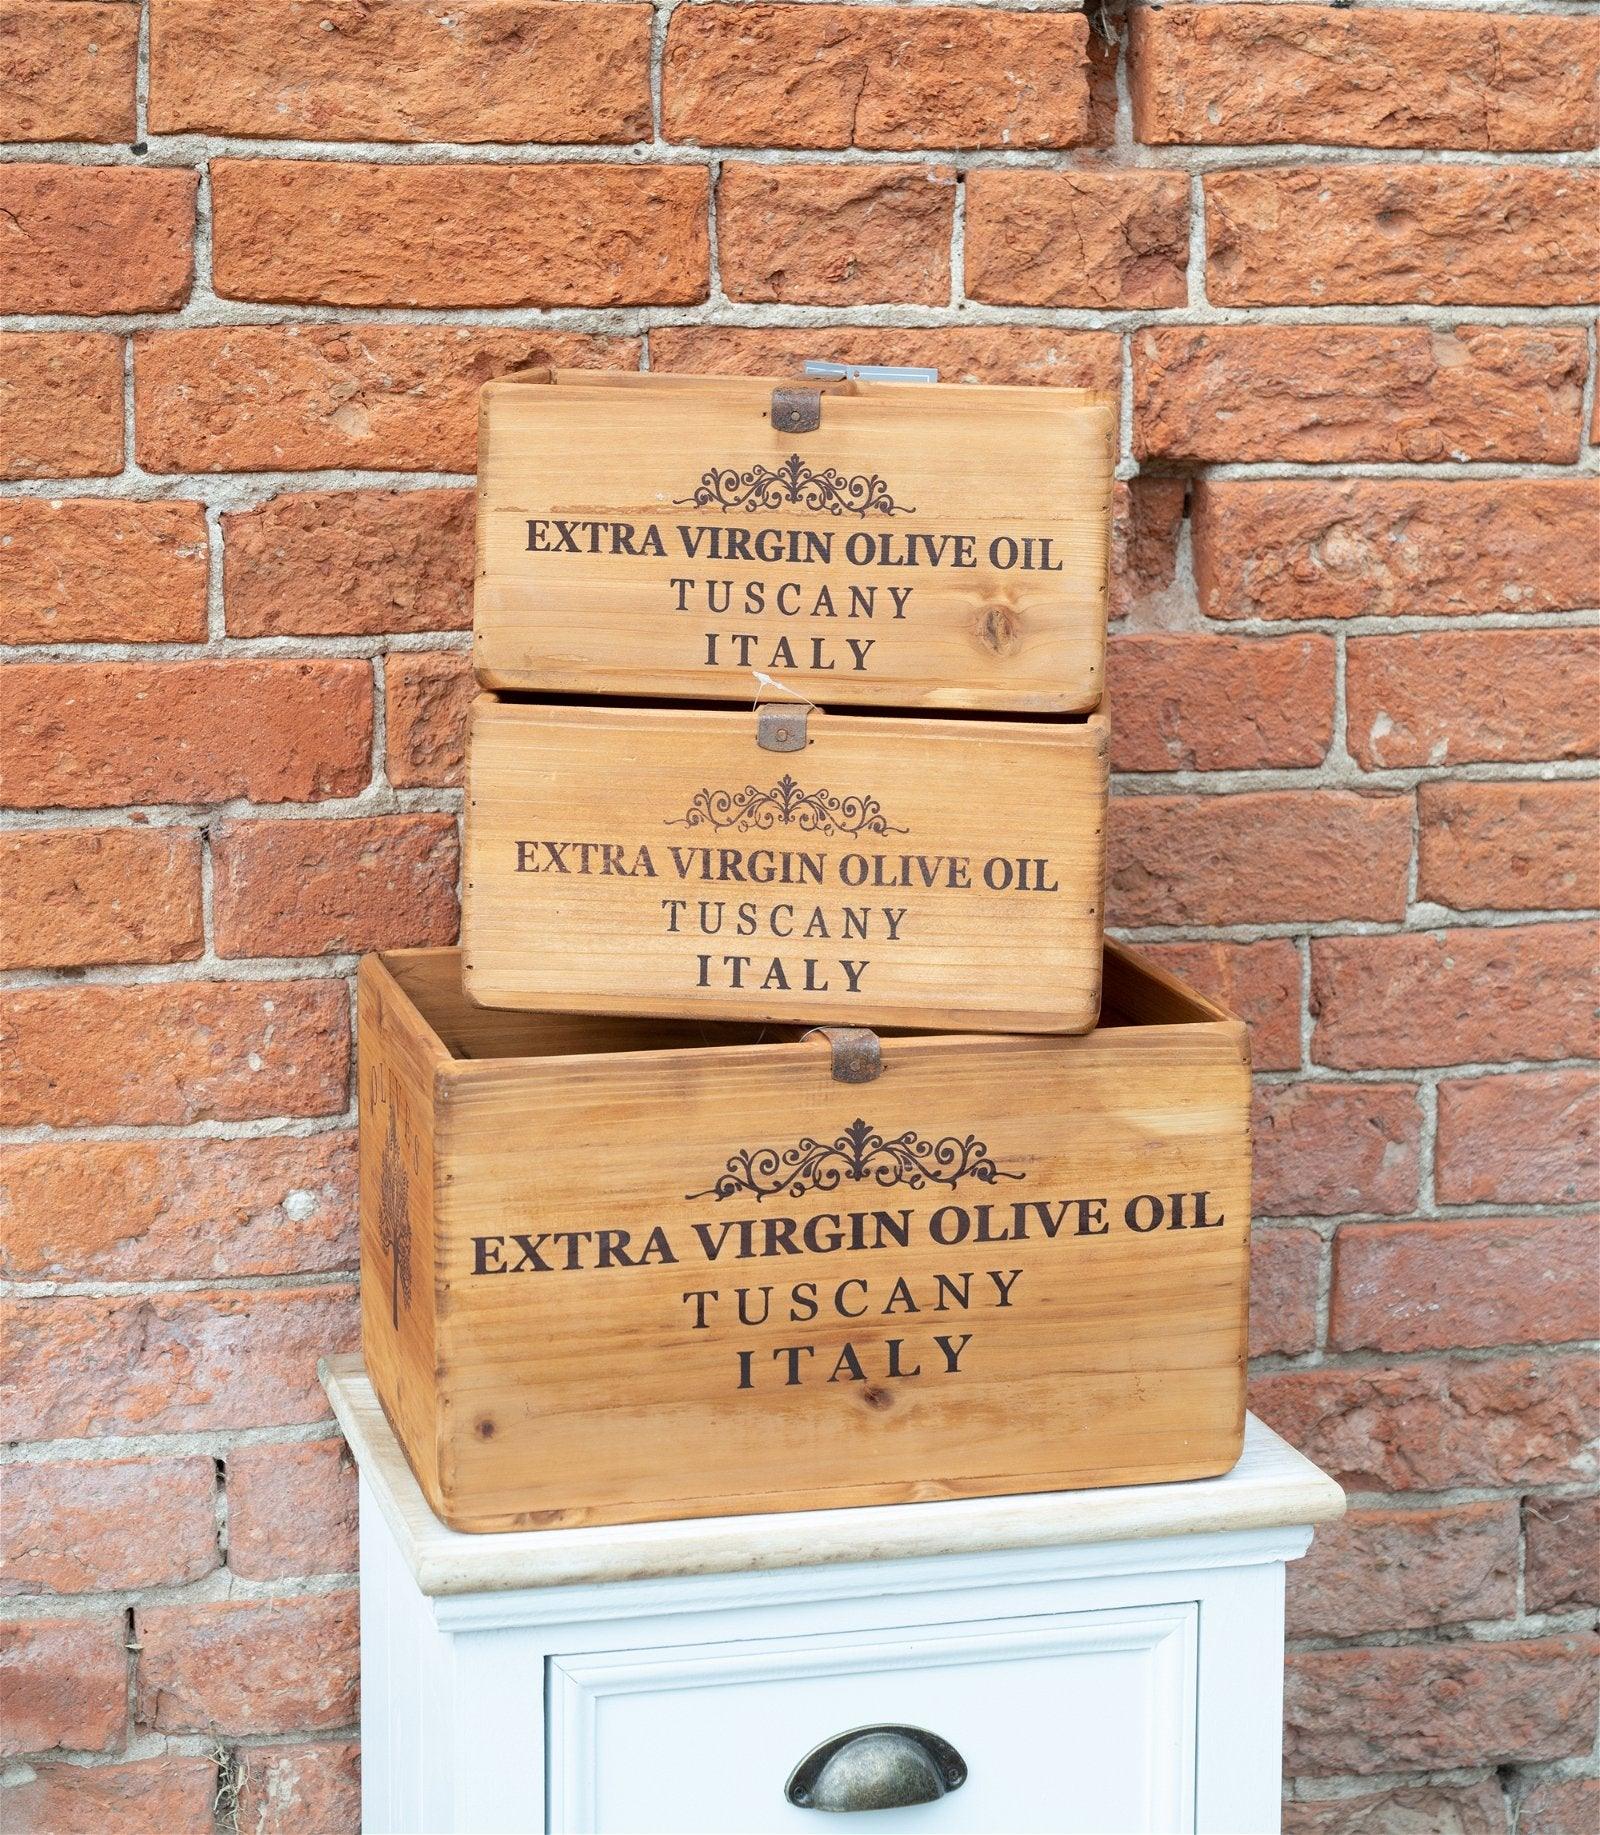 Set of Three Olive Oil' Wooden Crates - £135.99 - Storage Baskets 